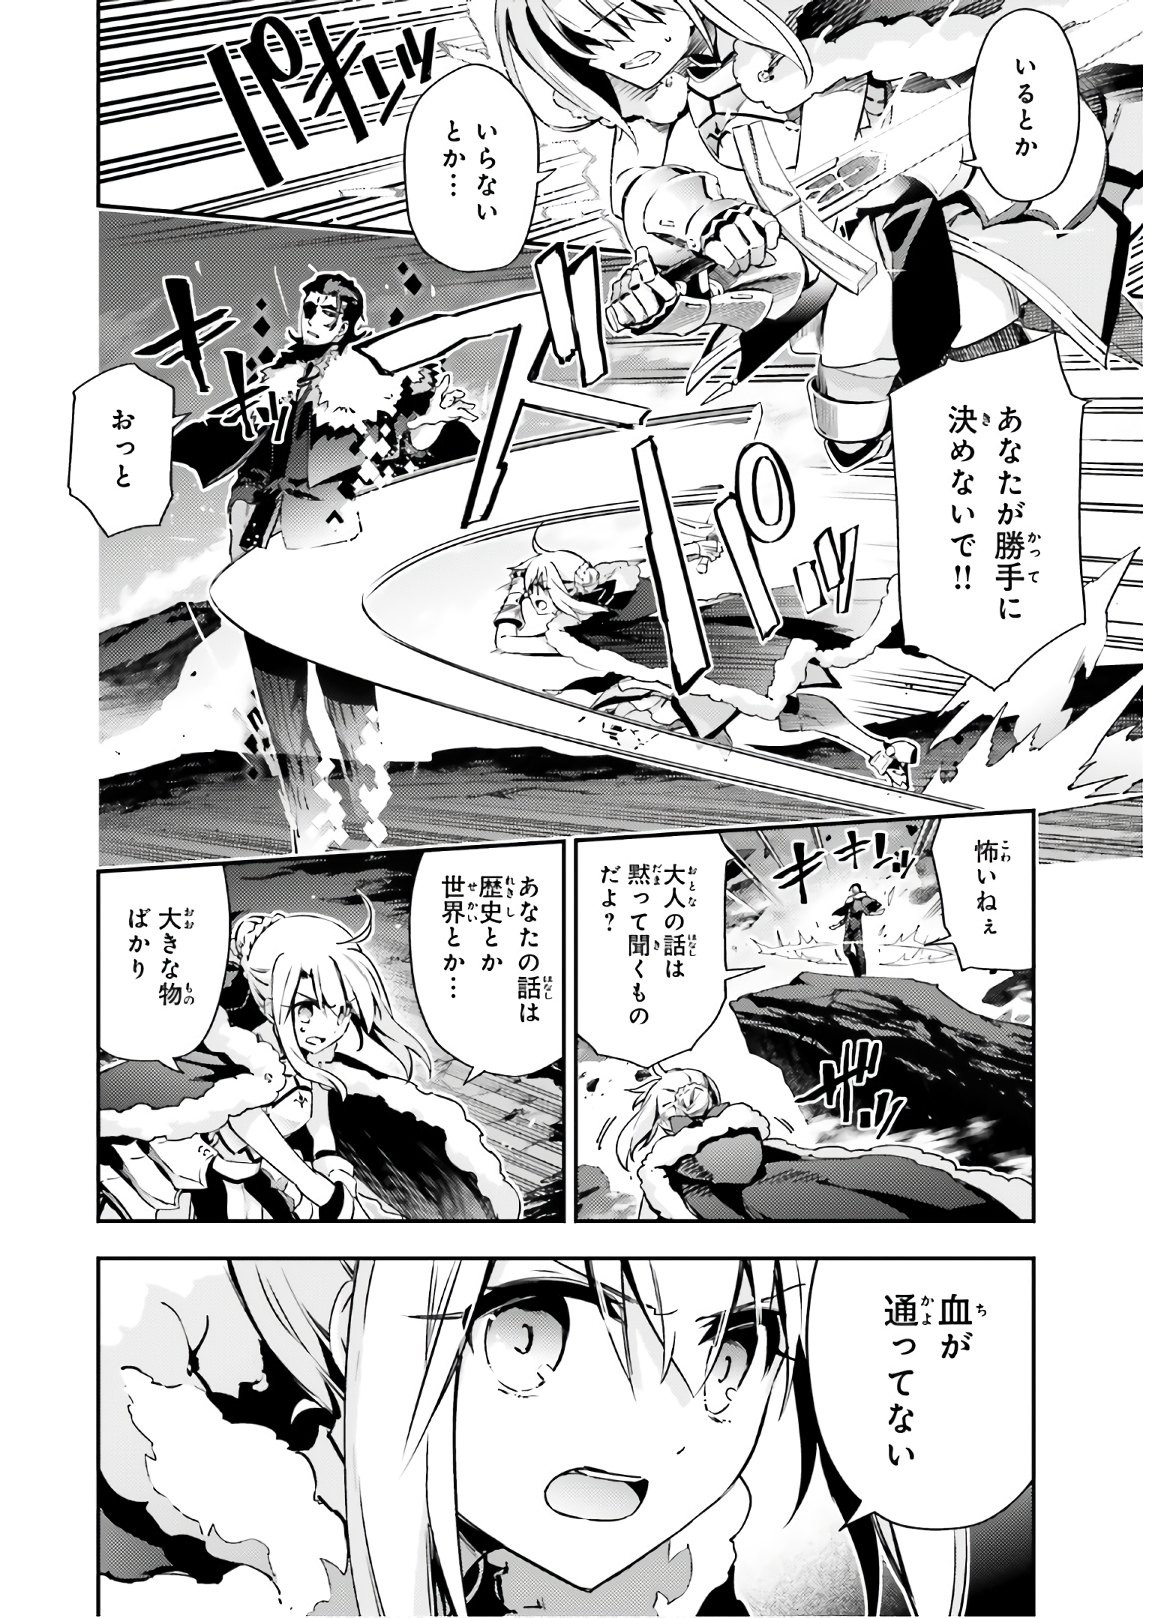 Fate/Kaleid Liner Prisma Illya Drei! - Chapter 58-1 - Page 10